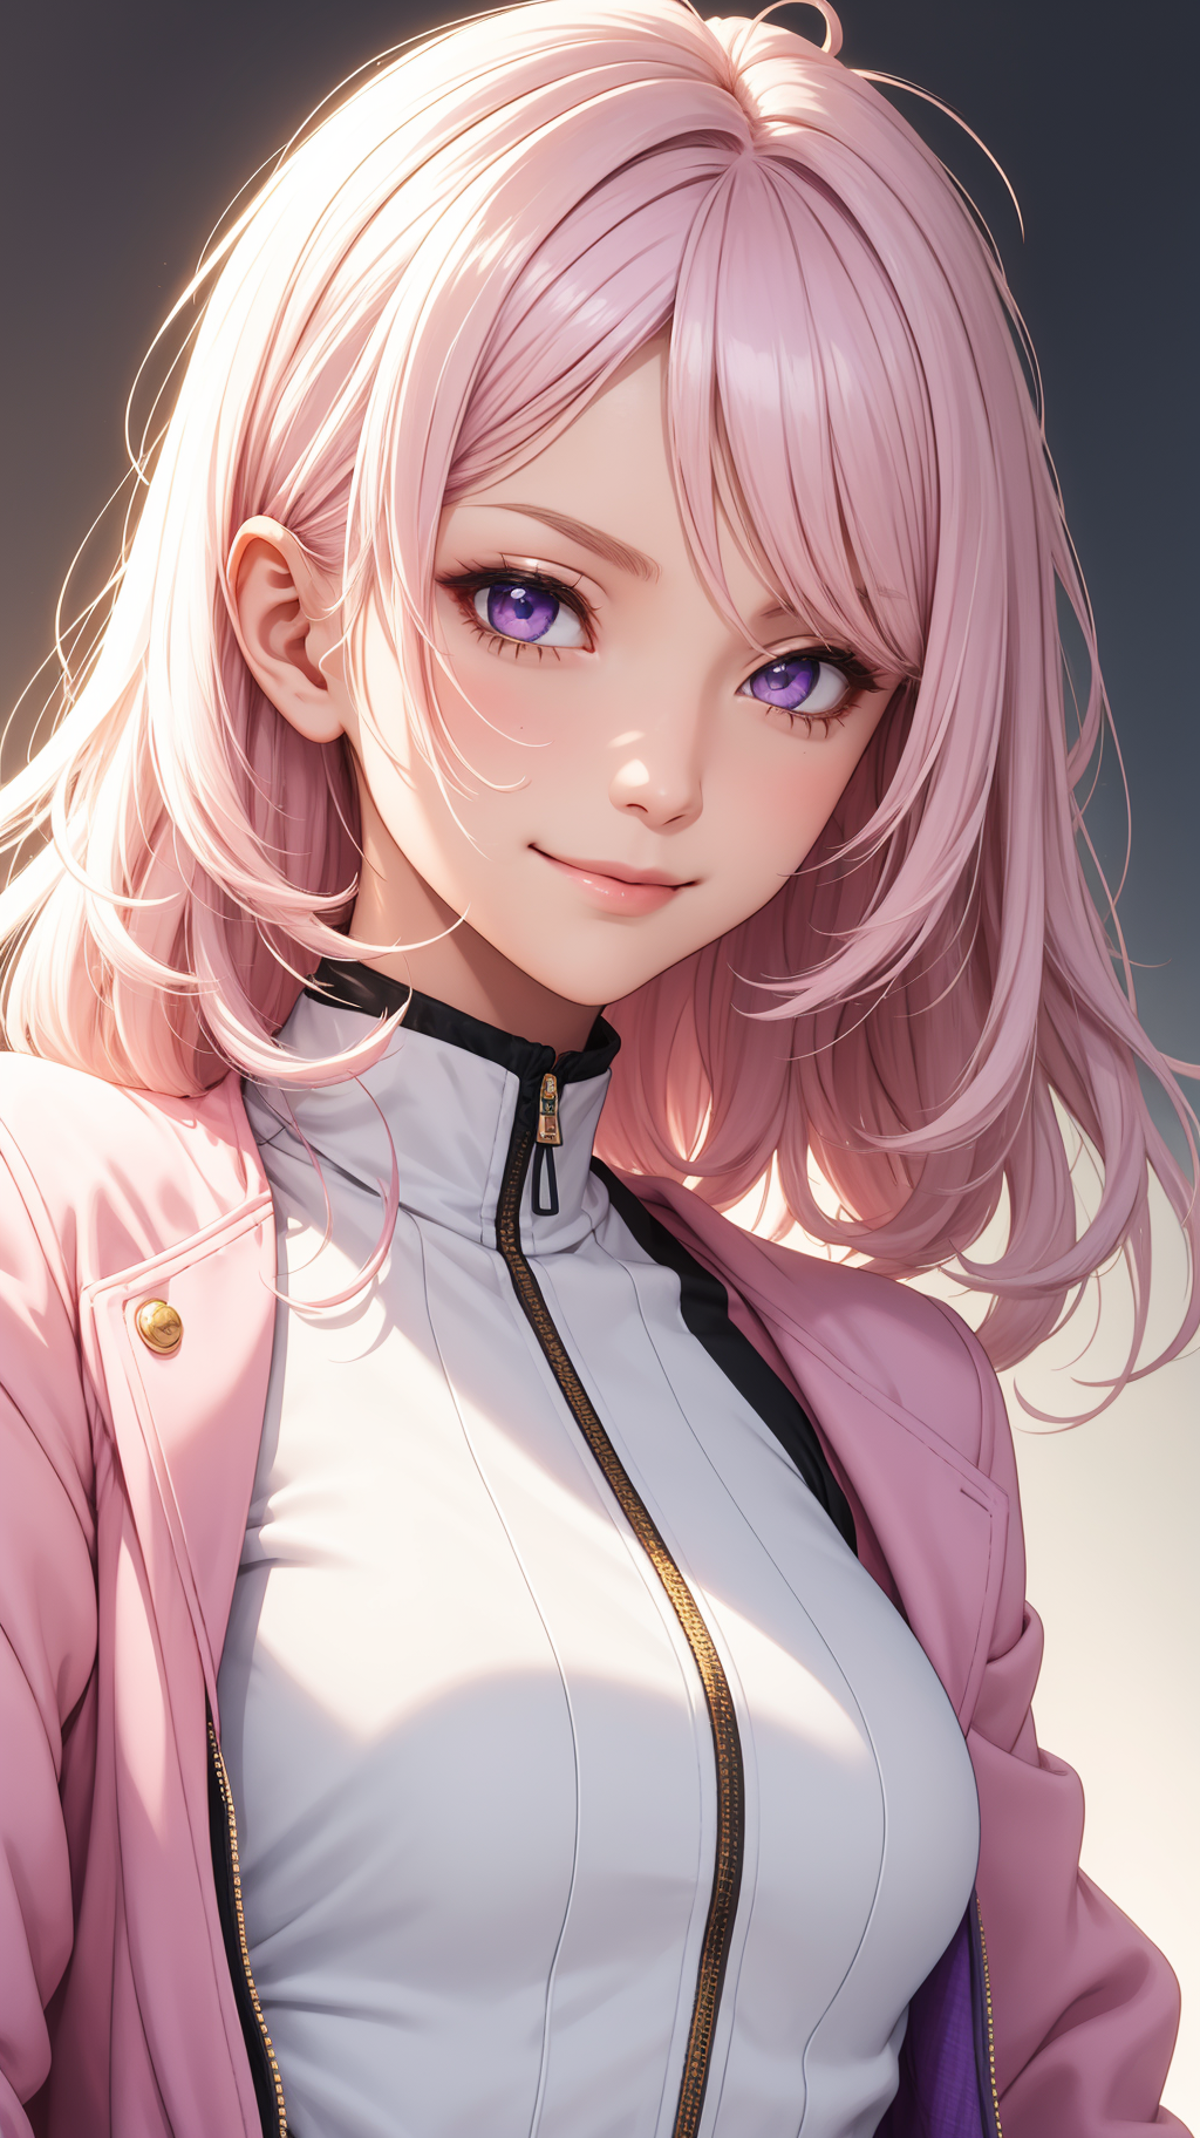 A young girl with purple eyes, pink hair, and a pink outfit is smiling.